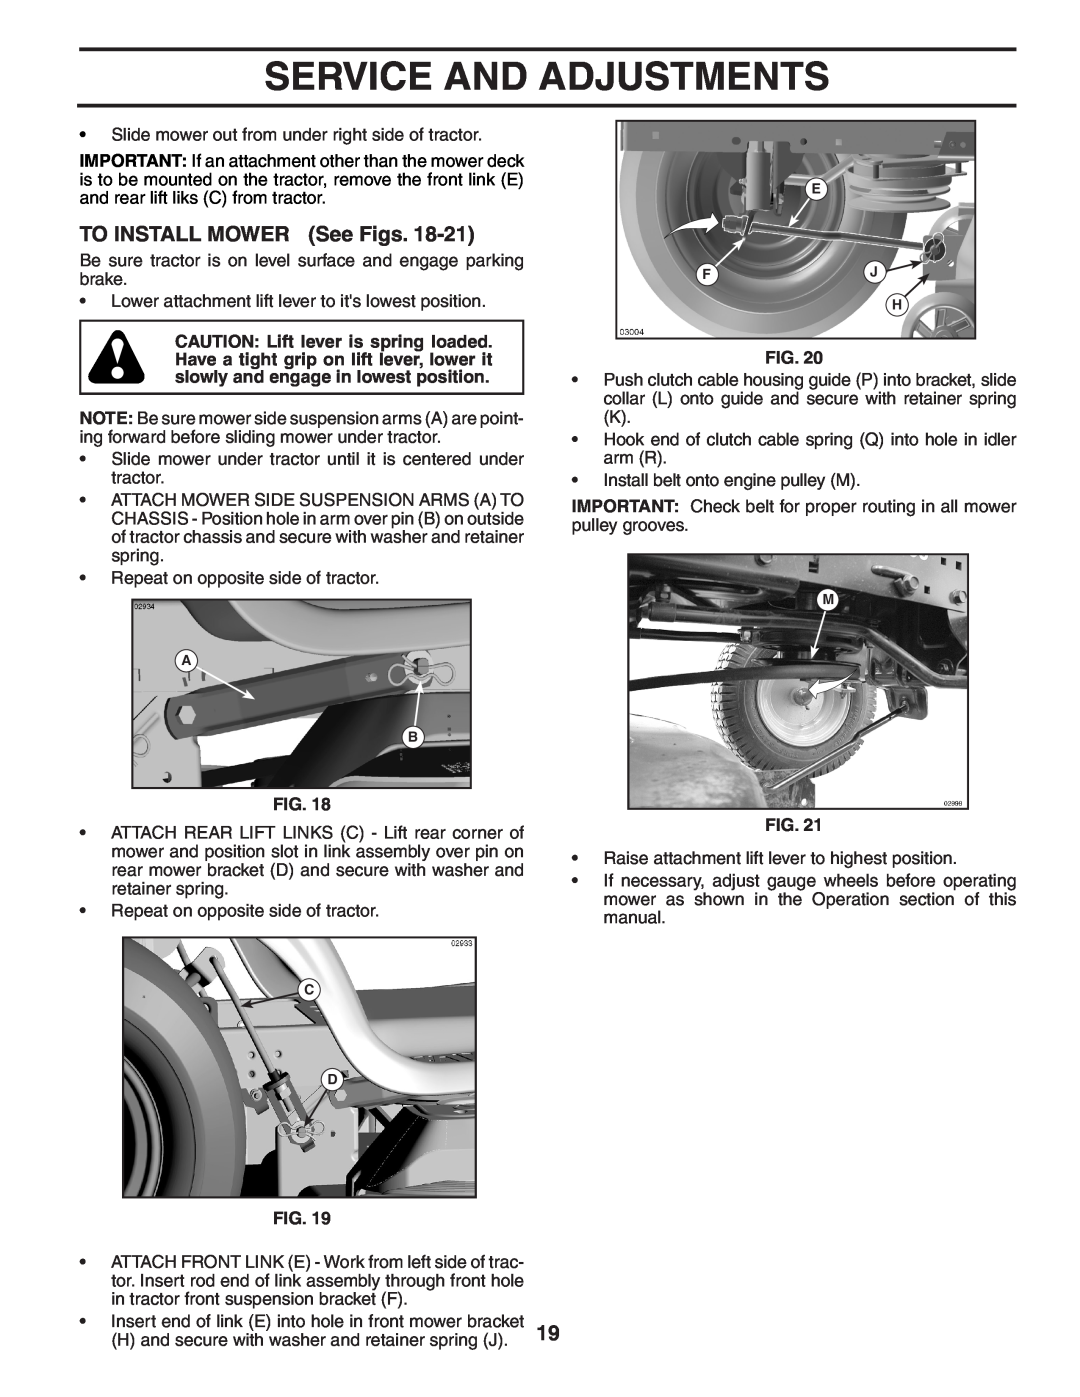 Poulan 96042000800, 402938 manual TO INSTALL MOWER See Figs, Service And Adjustments, E Fj H 